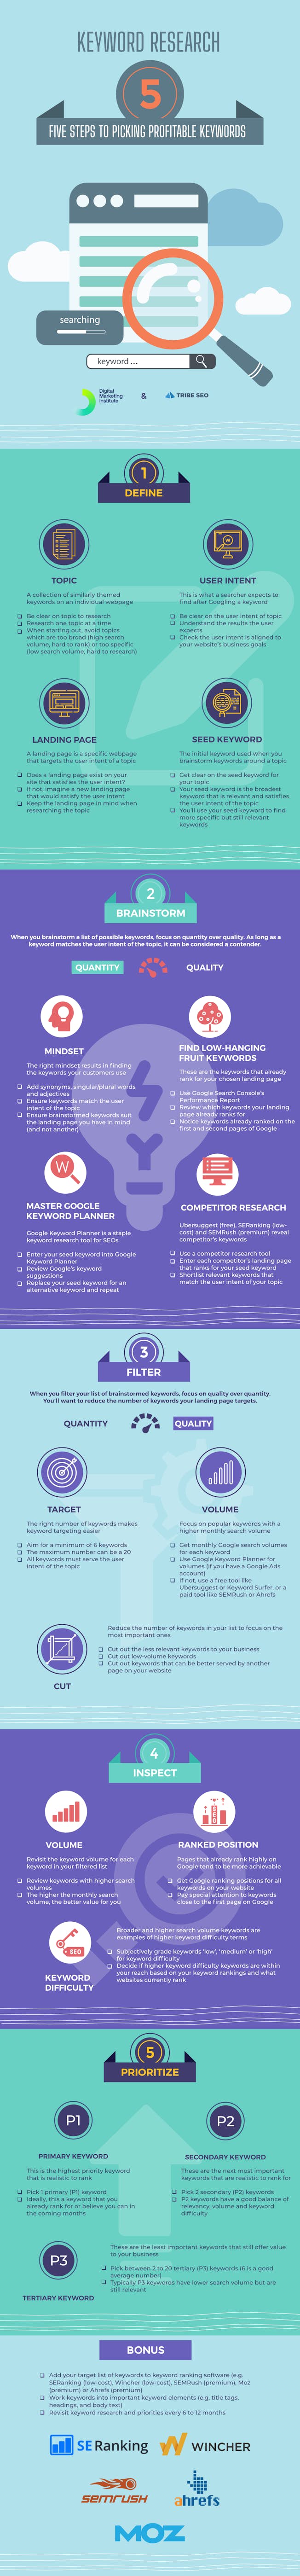 Infographic: The 5 Steps of Keyword Research